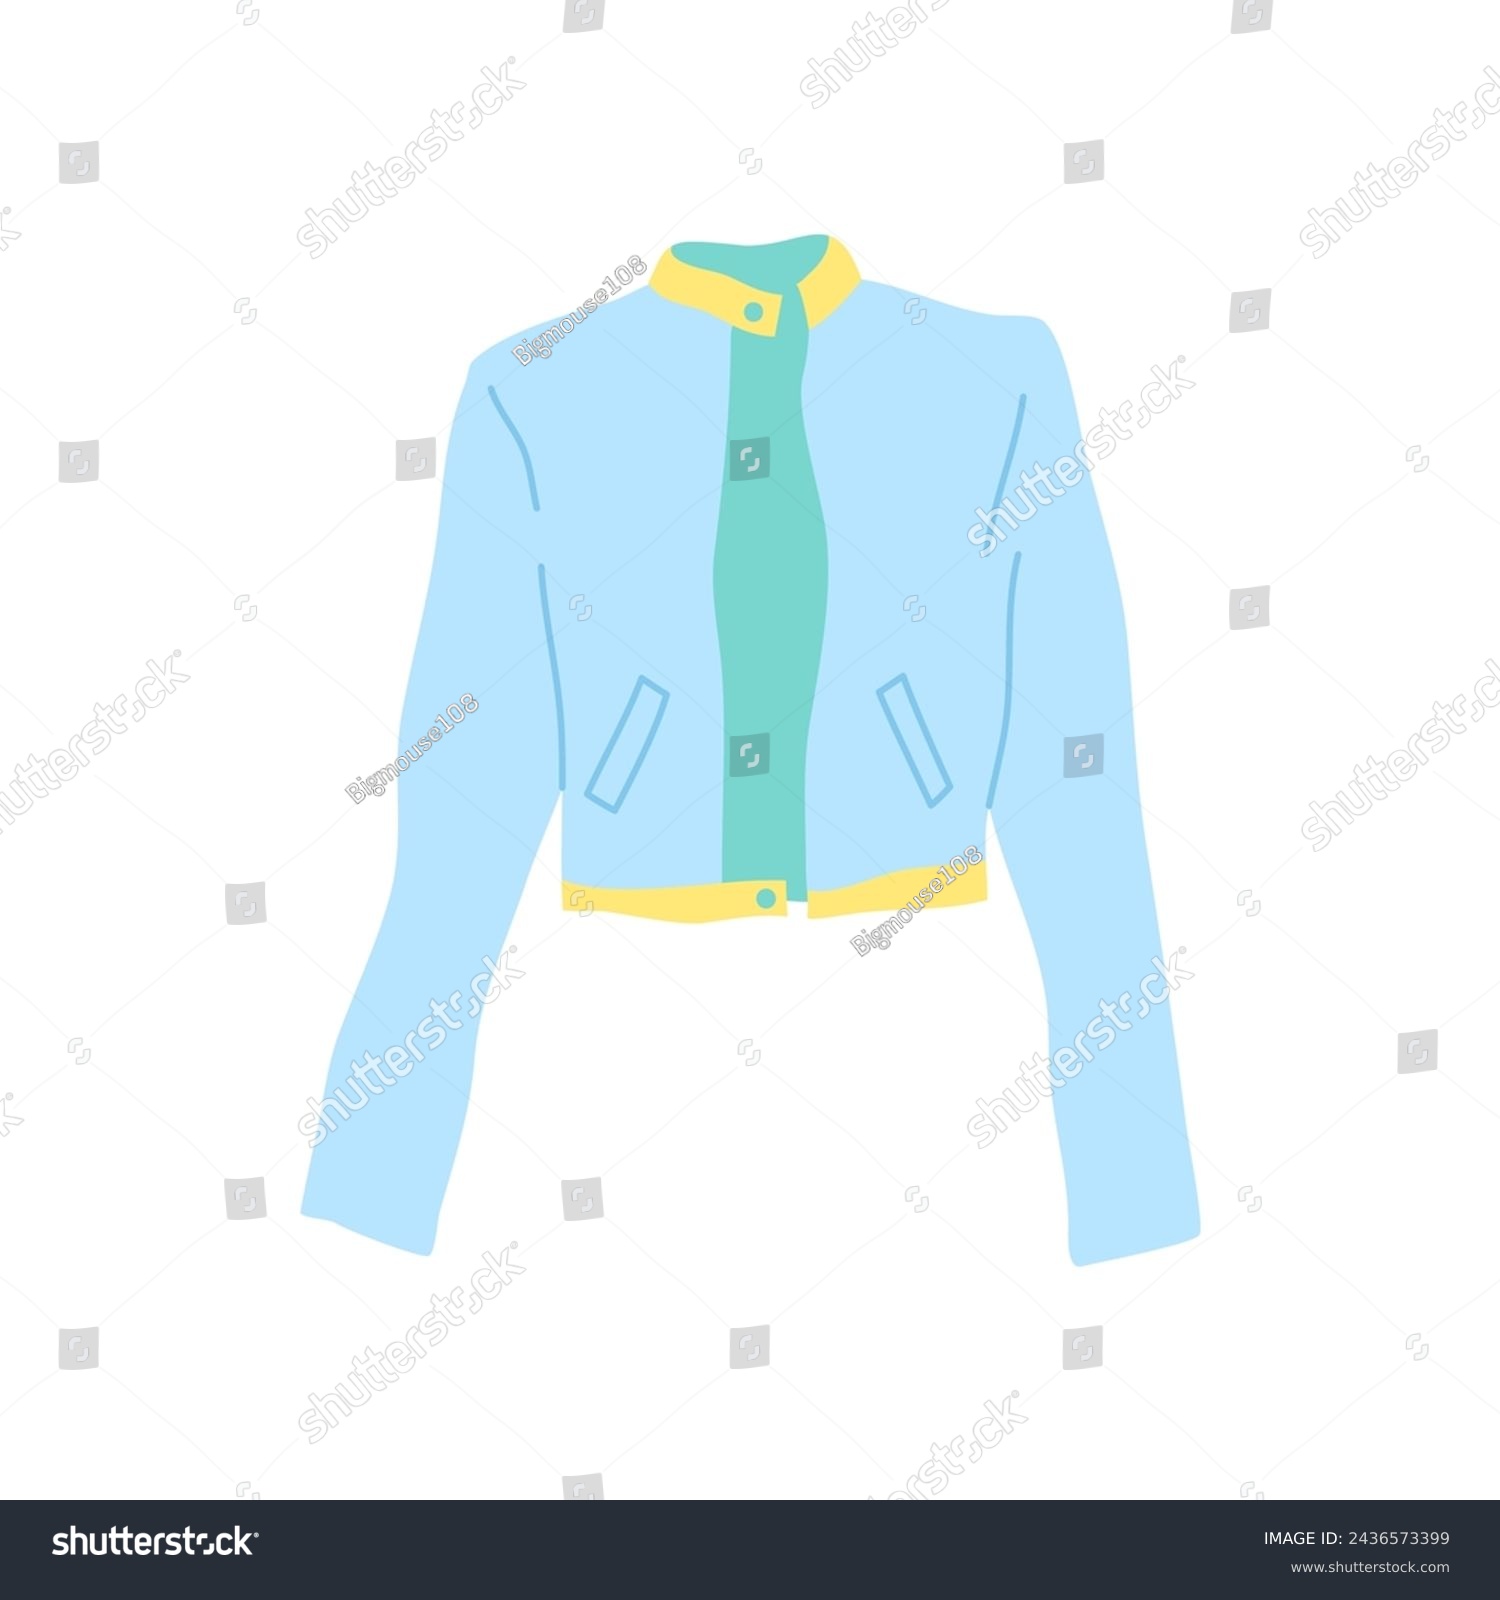 SVG of Cartoon Clothe Female Blue Yellow Jacket Concept Flat Design Style Isolated on a White Background. Vector illustration svg